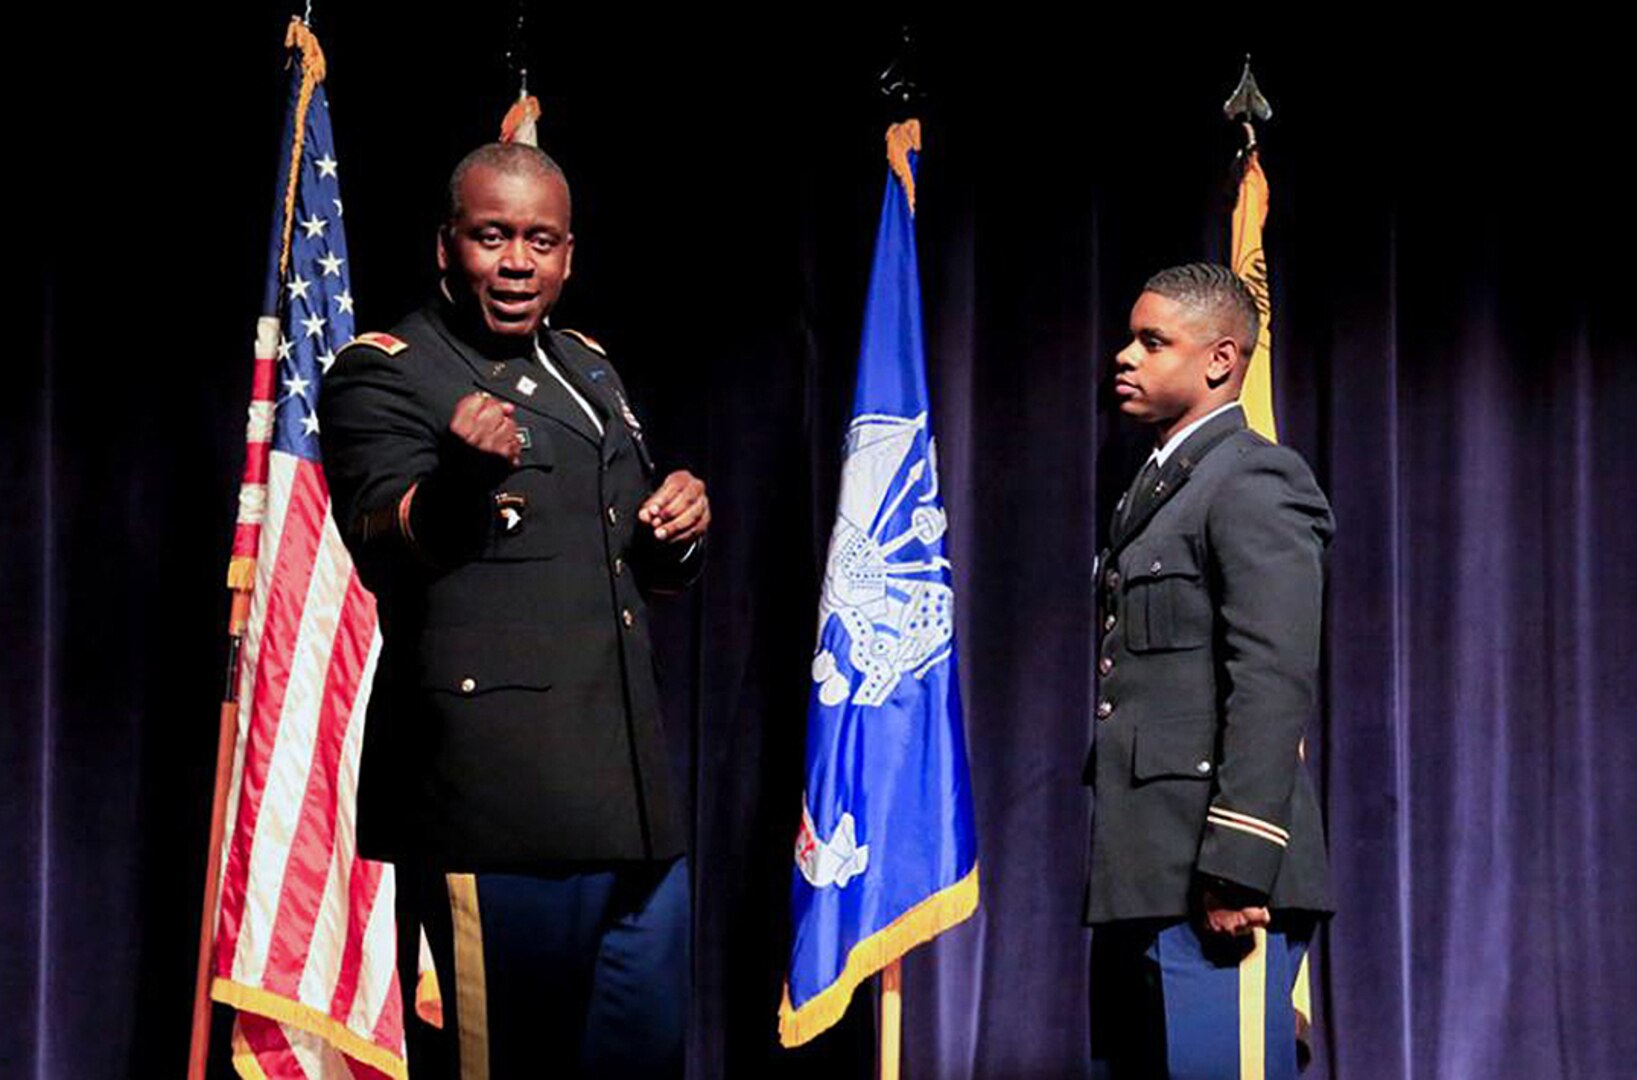 Army Col. Derrin E. Williams, commander of Defense Logistics Agency Central, addresses a class of new Army officers, including Army 2nd Lt. Marcus Rivers, at a Dec. 11 ceremony at Florida A&M University in Tallahassee.